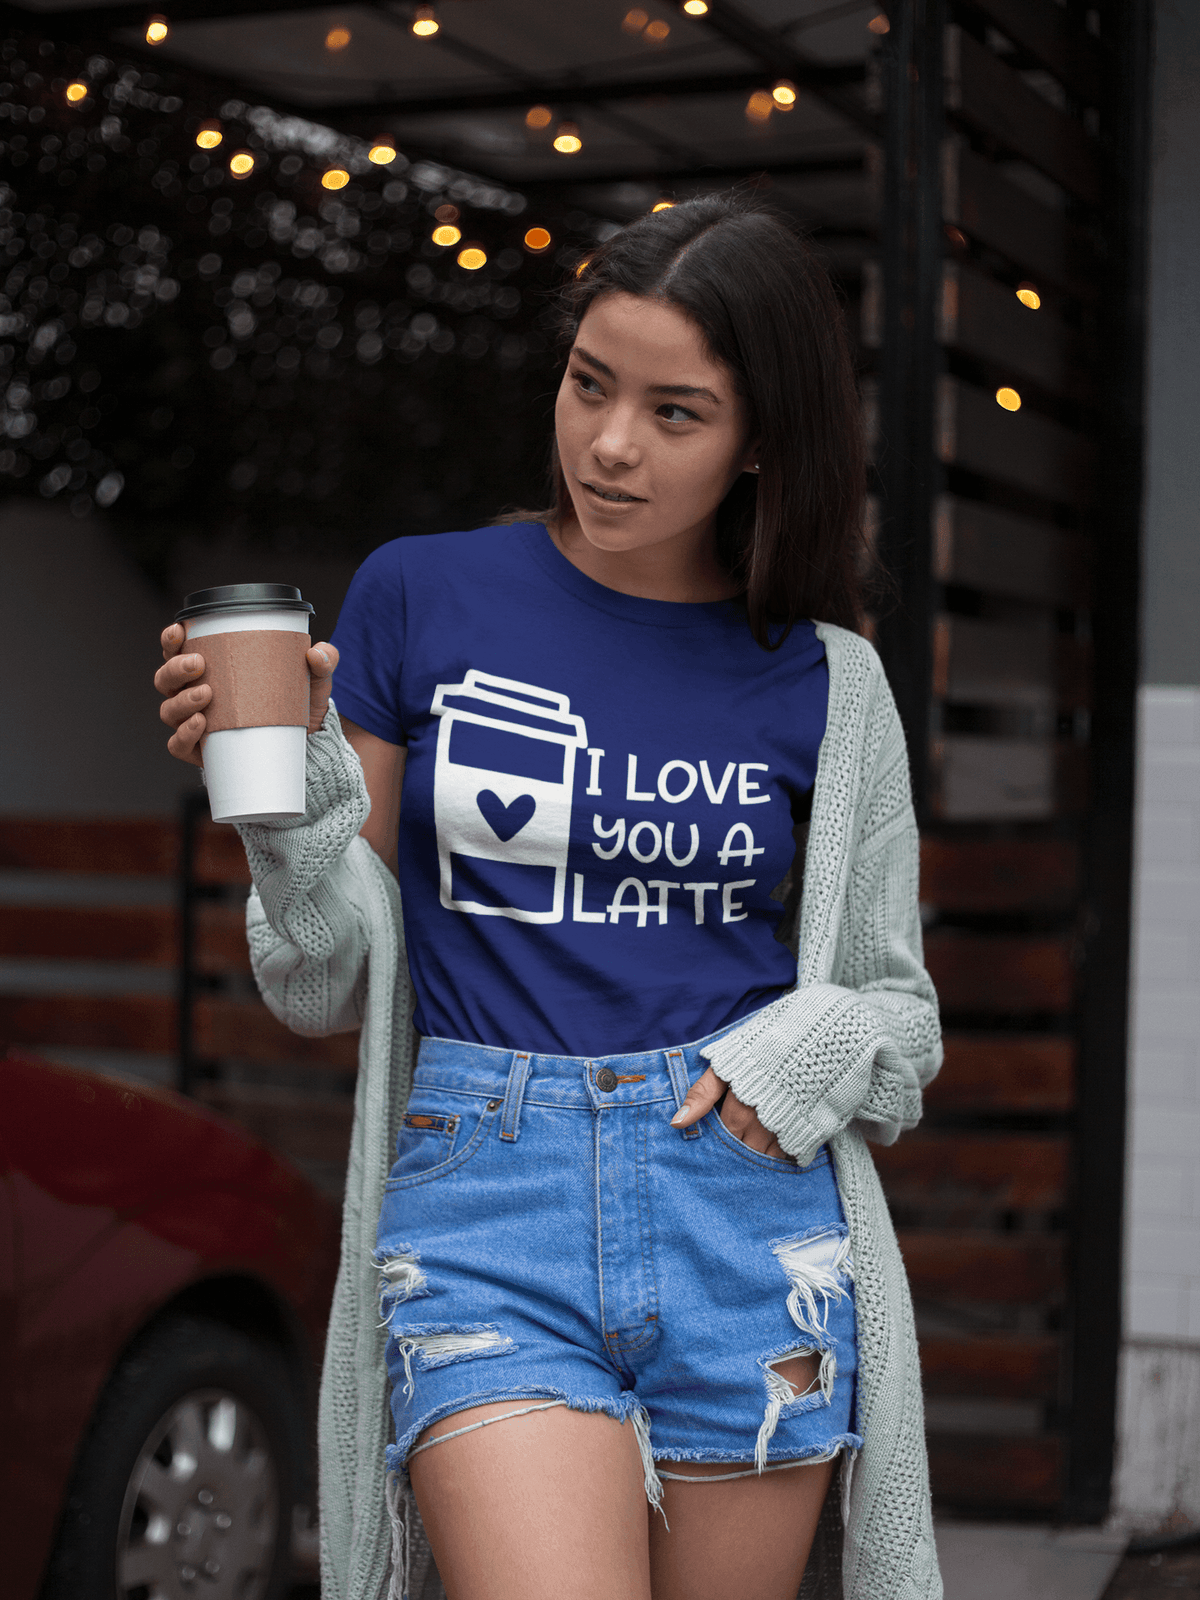 I LOVE YOU A LATTE T-shirt-Regular Fit Tee-StylinArts